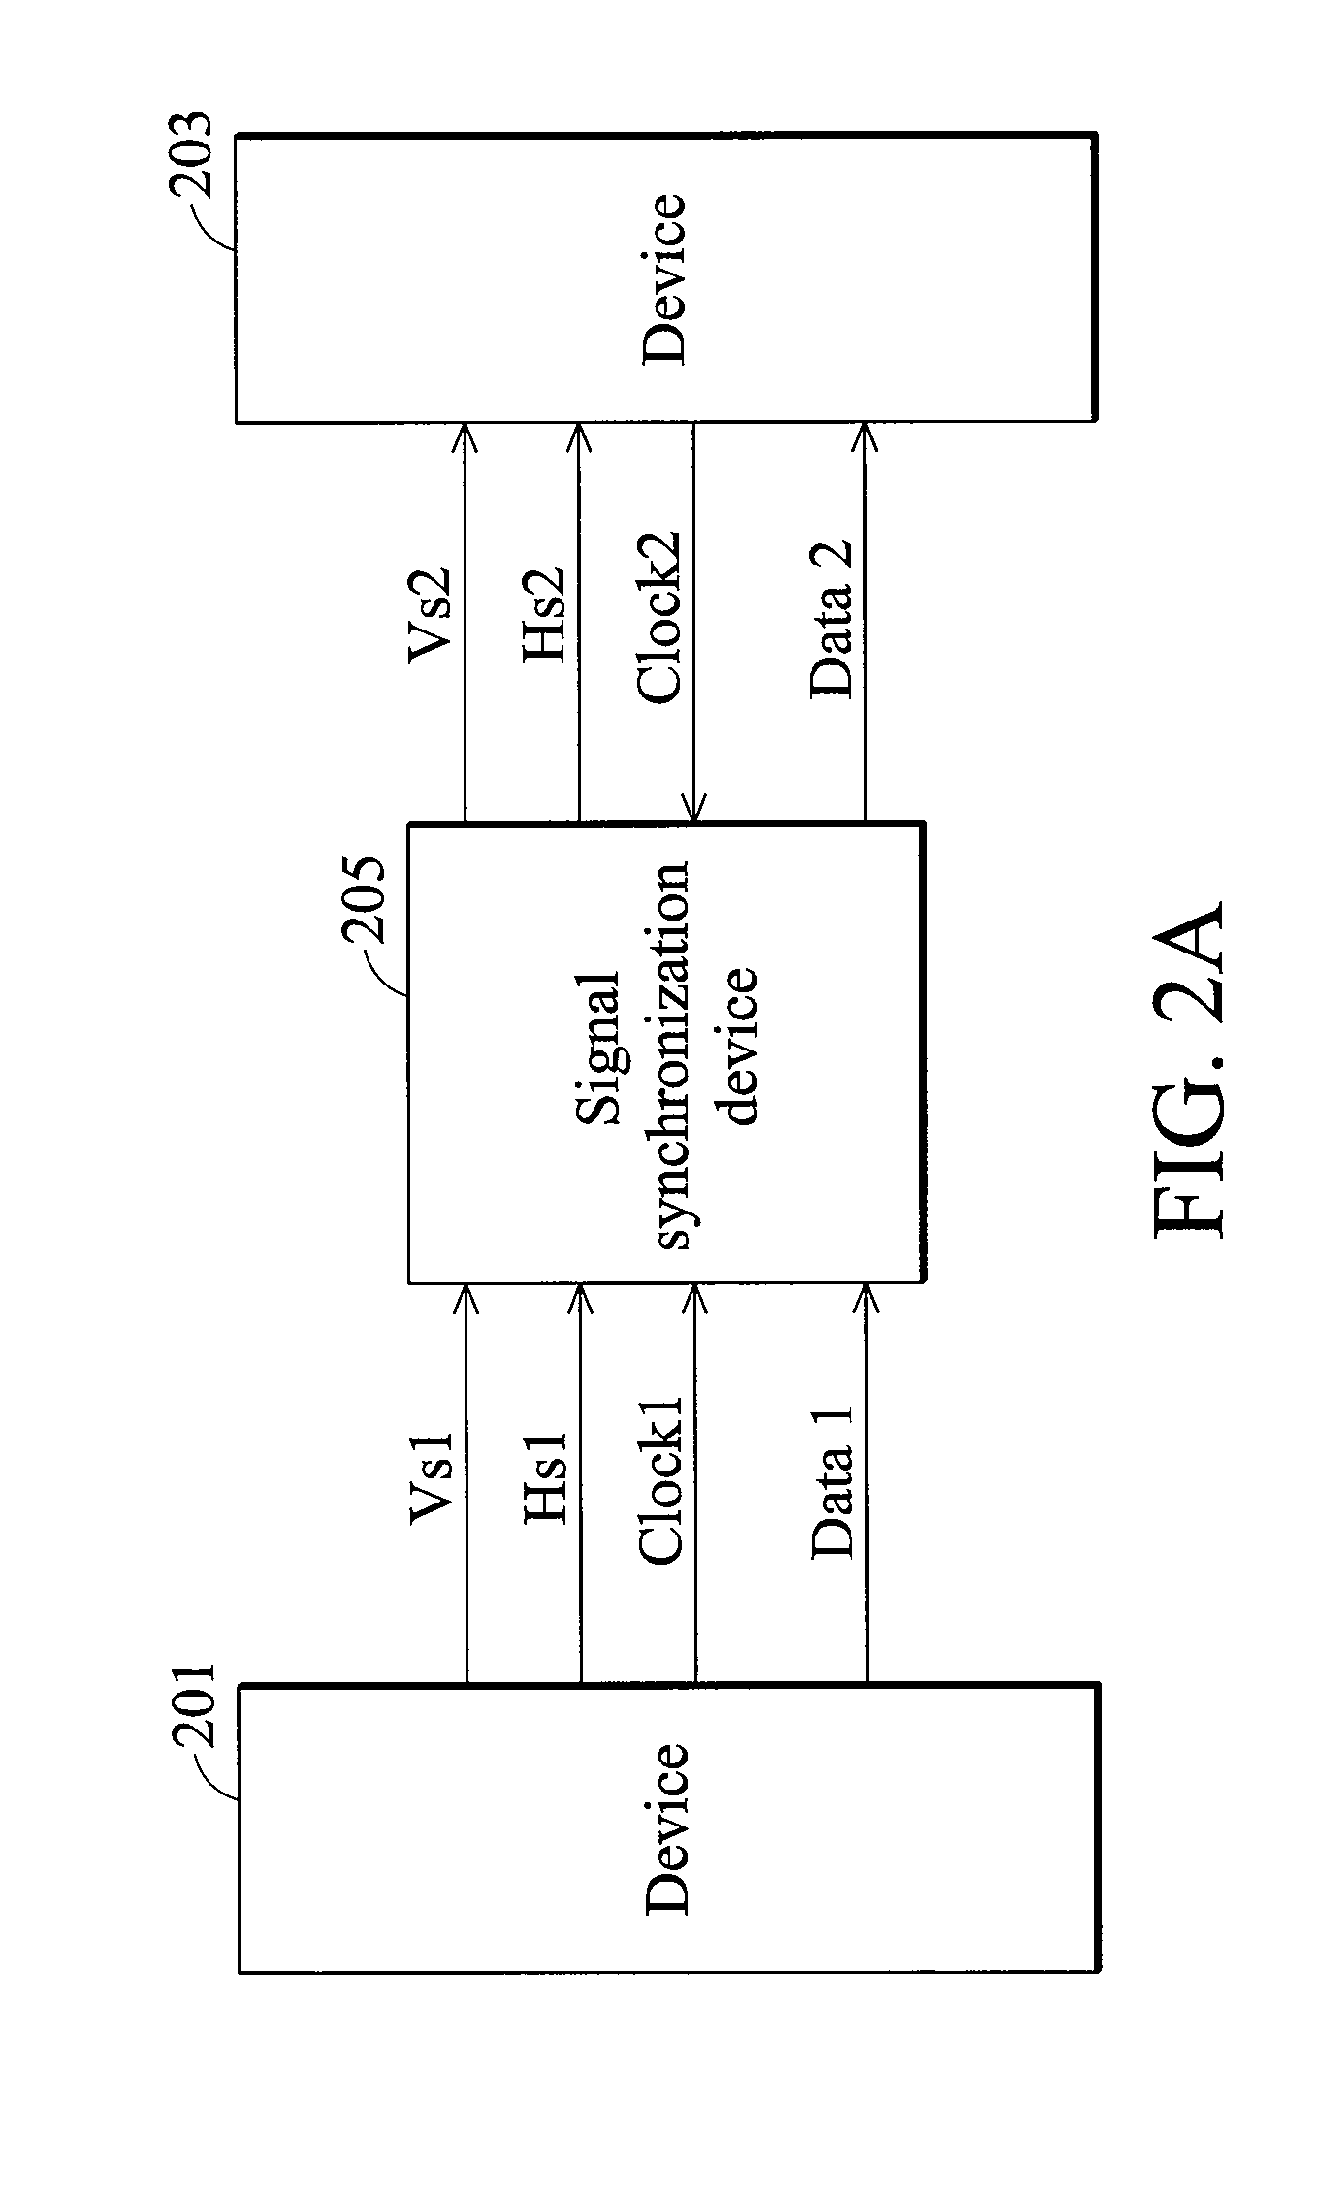 Methods and devices for signal synchronization